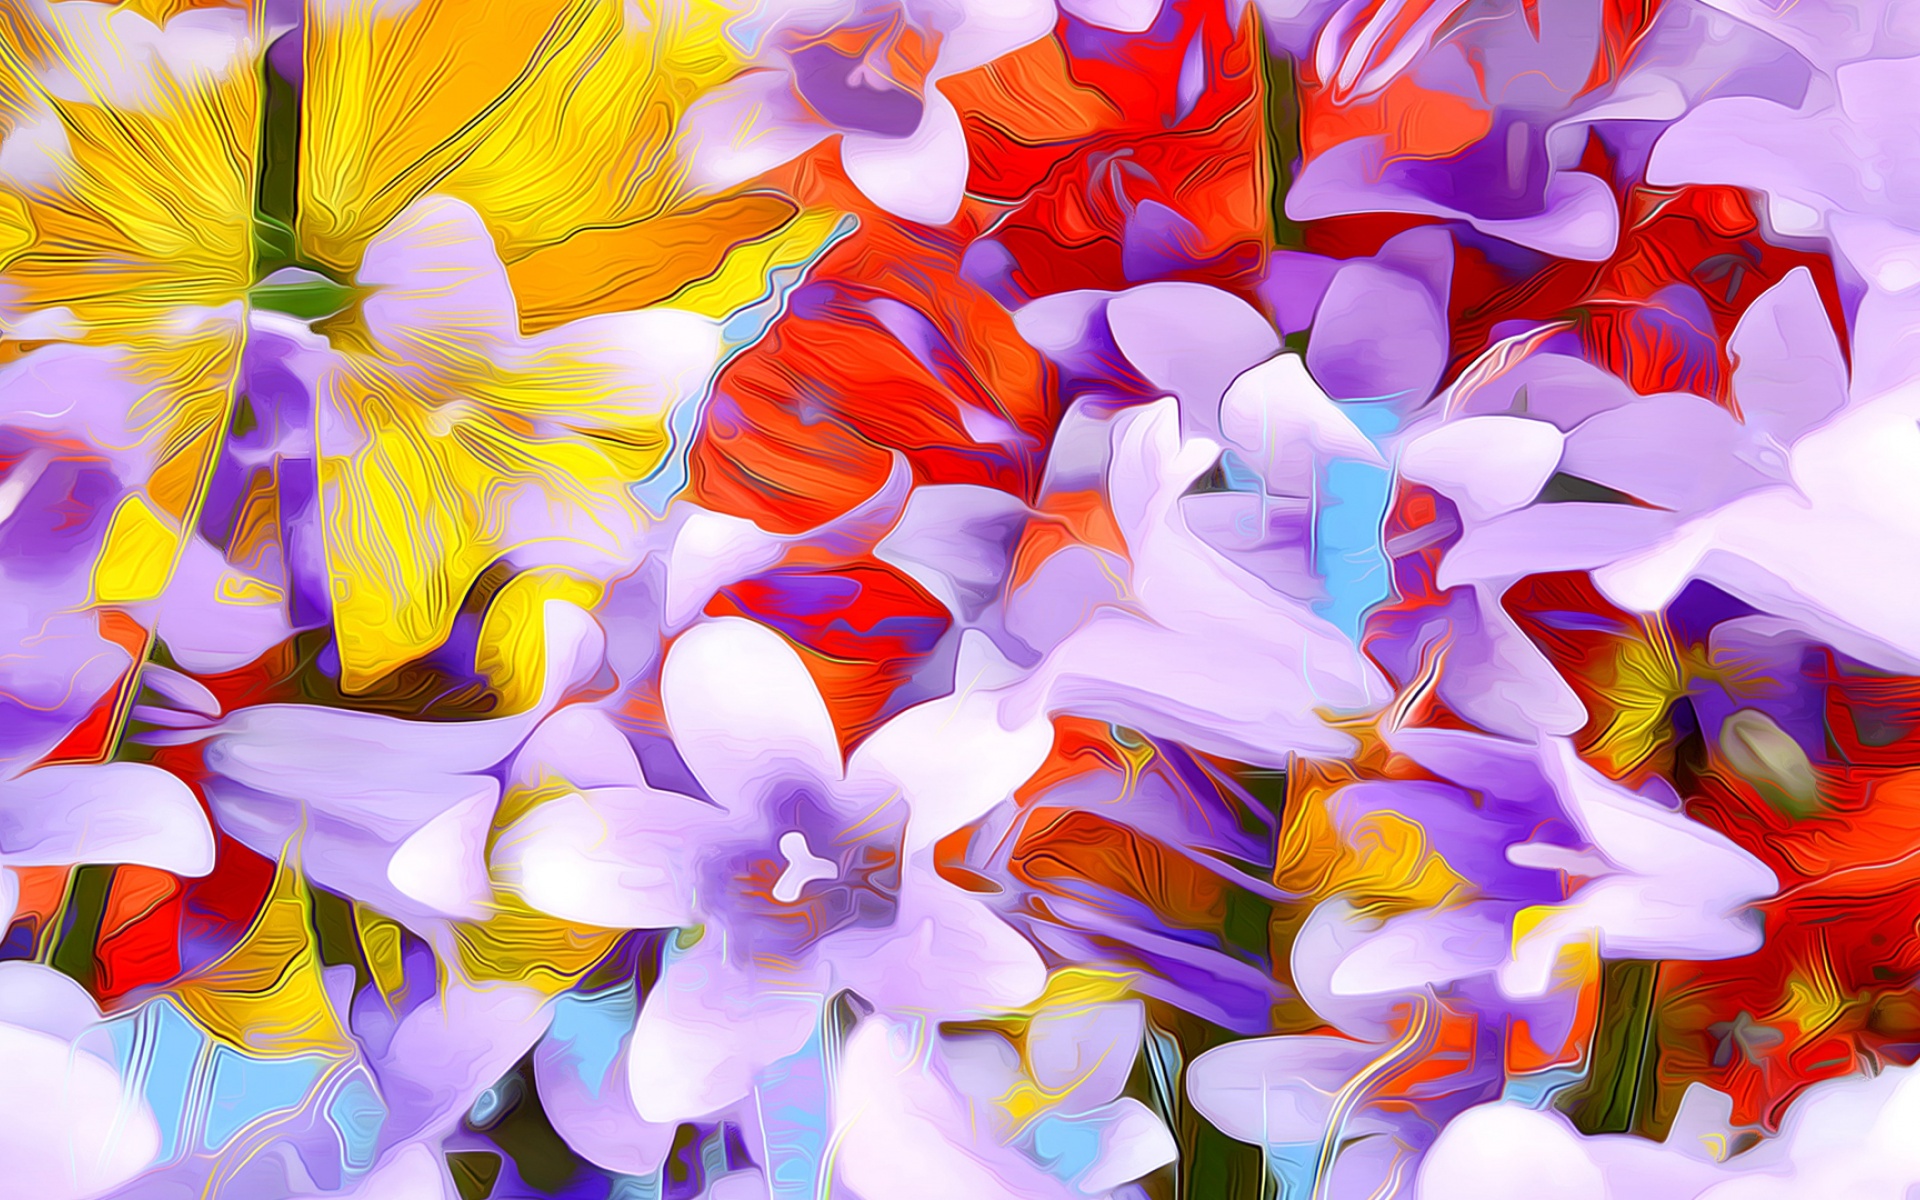 Flowers Art Abstraction (click to view) HD Wallpapers in 1920x1200 Resolution